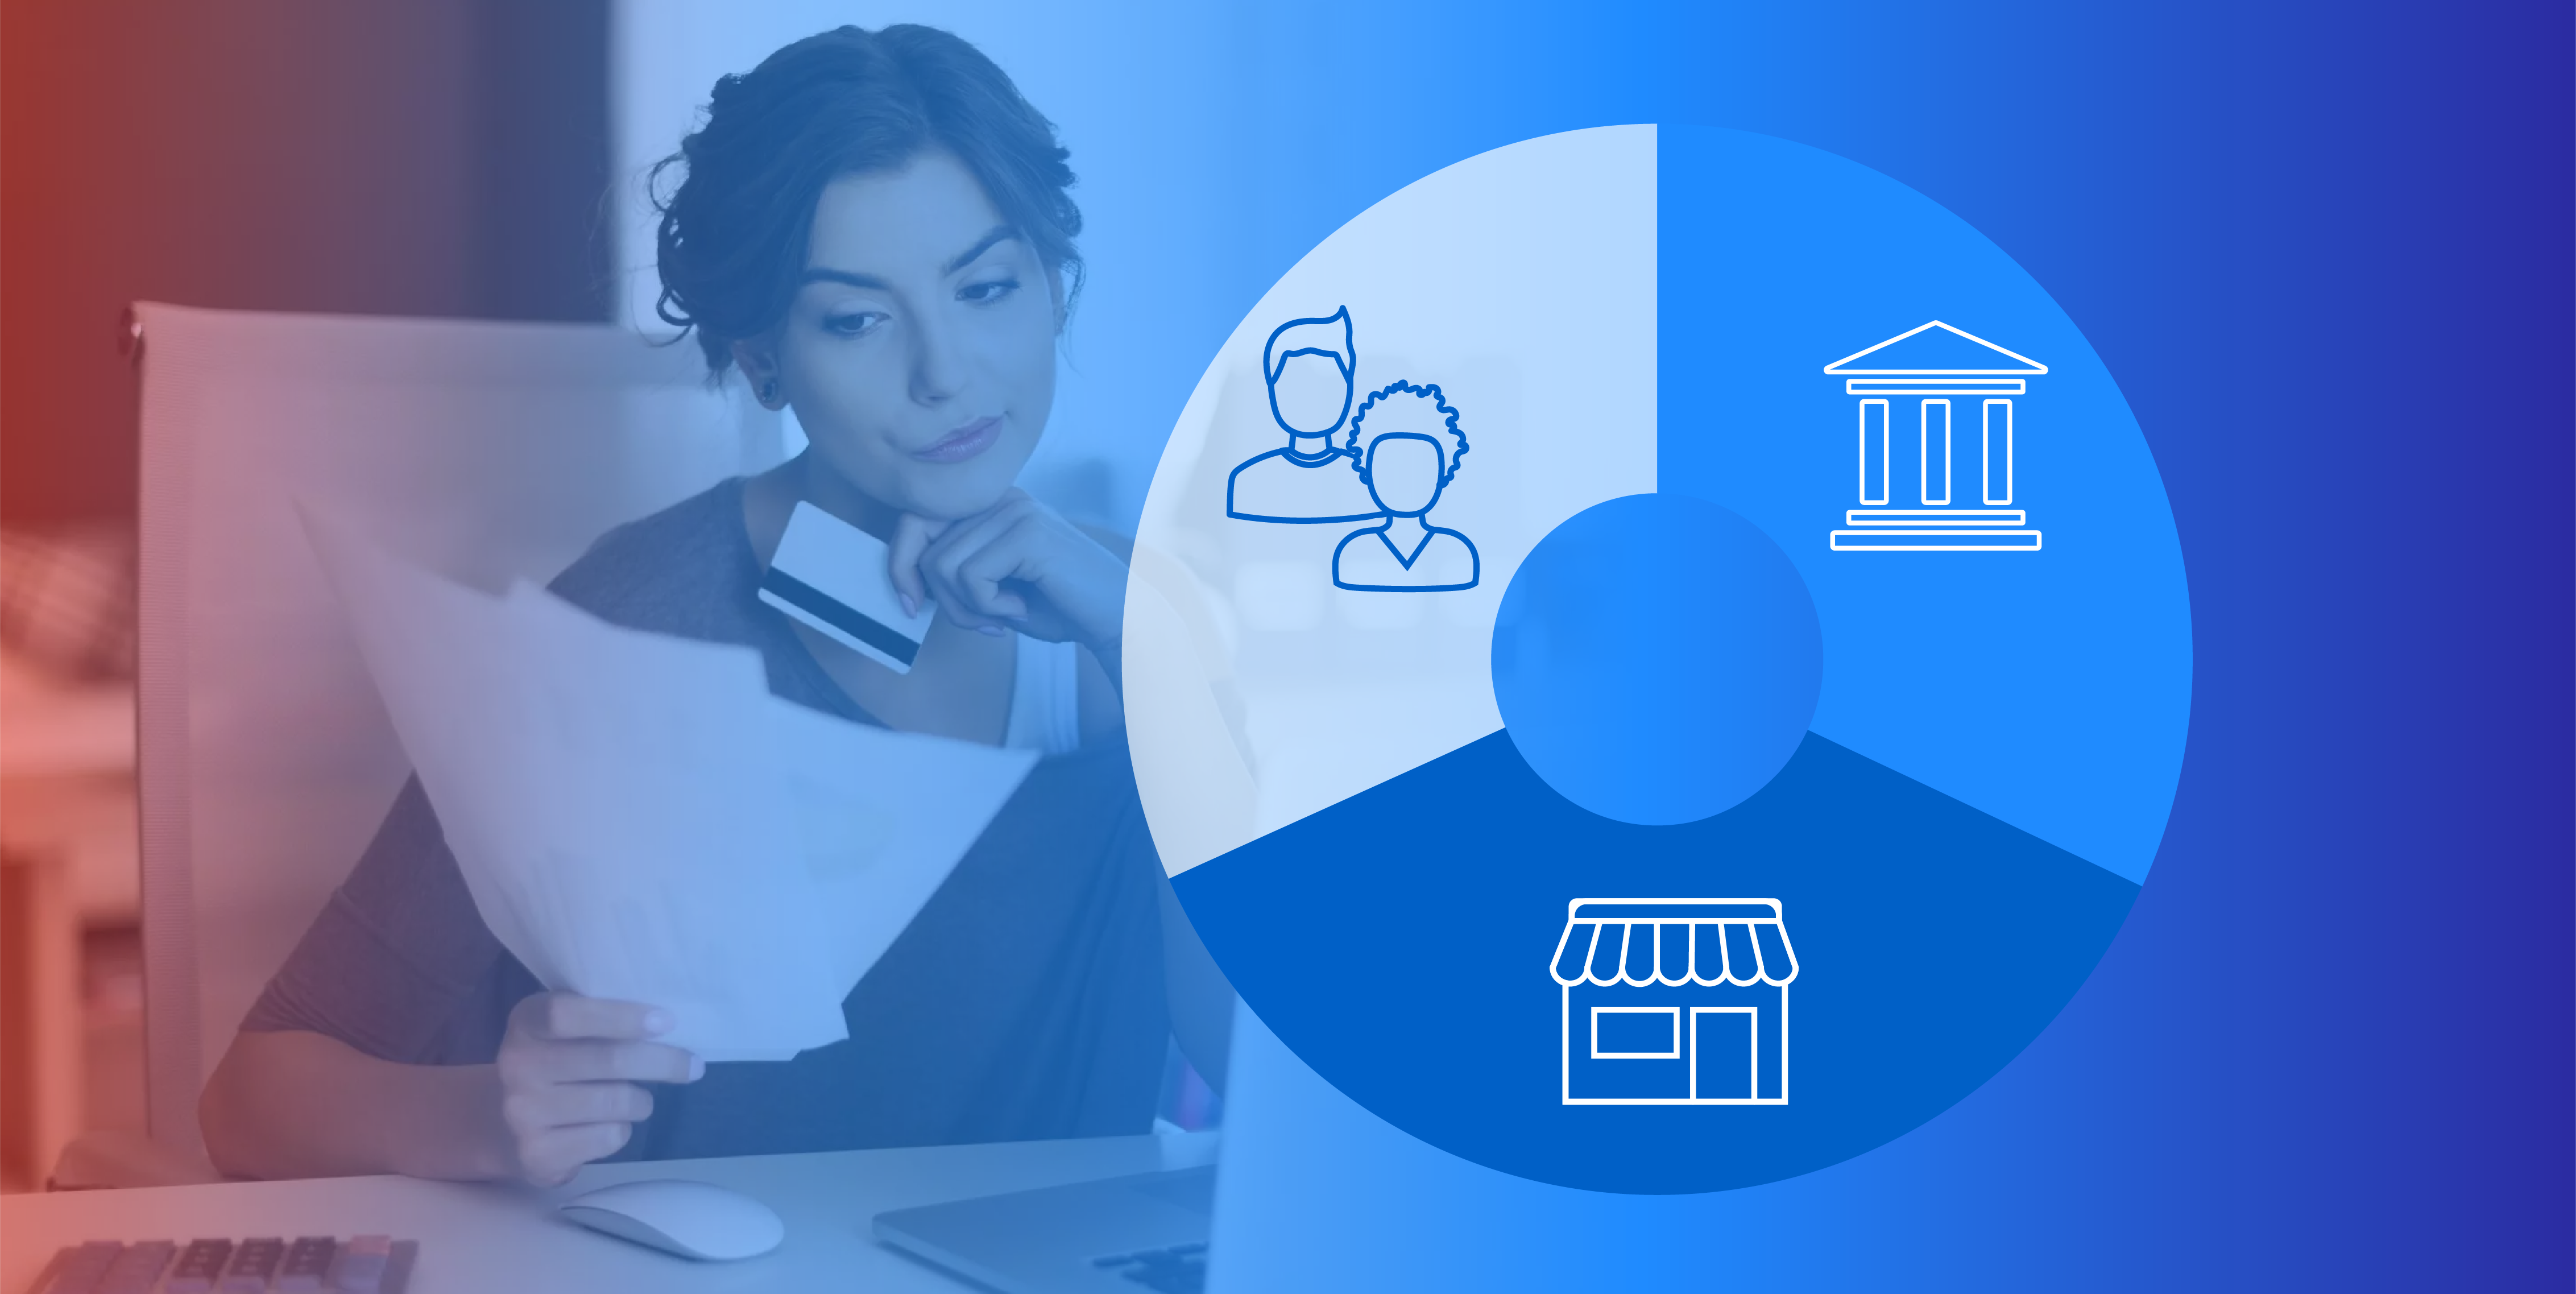 Consumers, Billers & Banks, Oh My! How Modernization Benefits Everyone in the Bill Pay Ecosystem